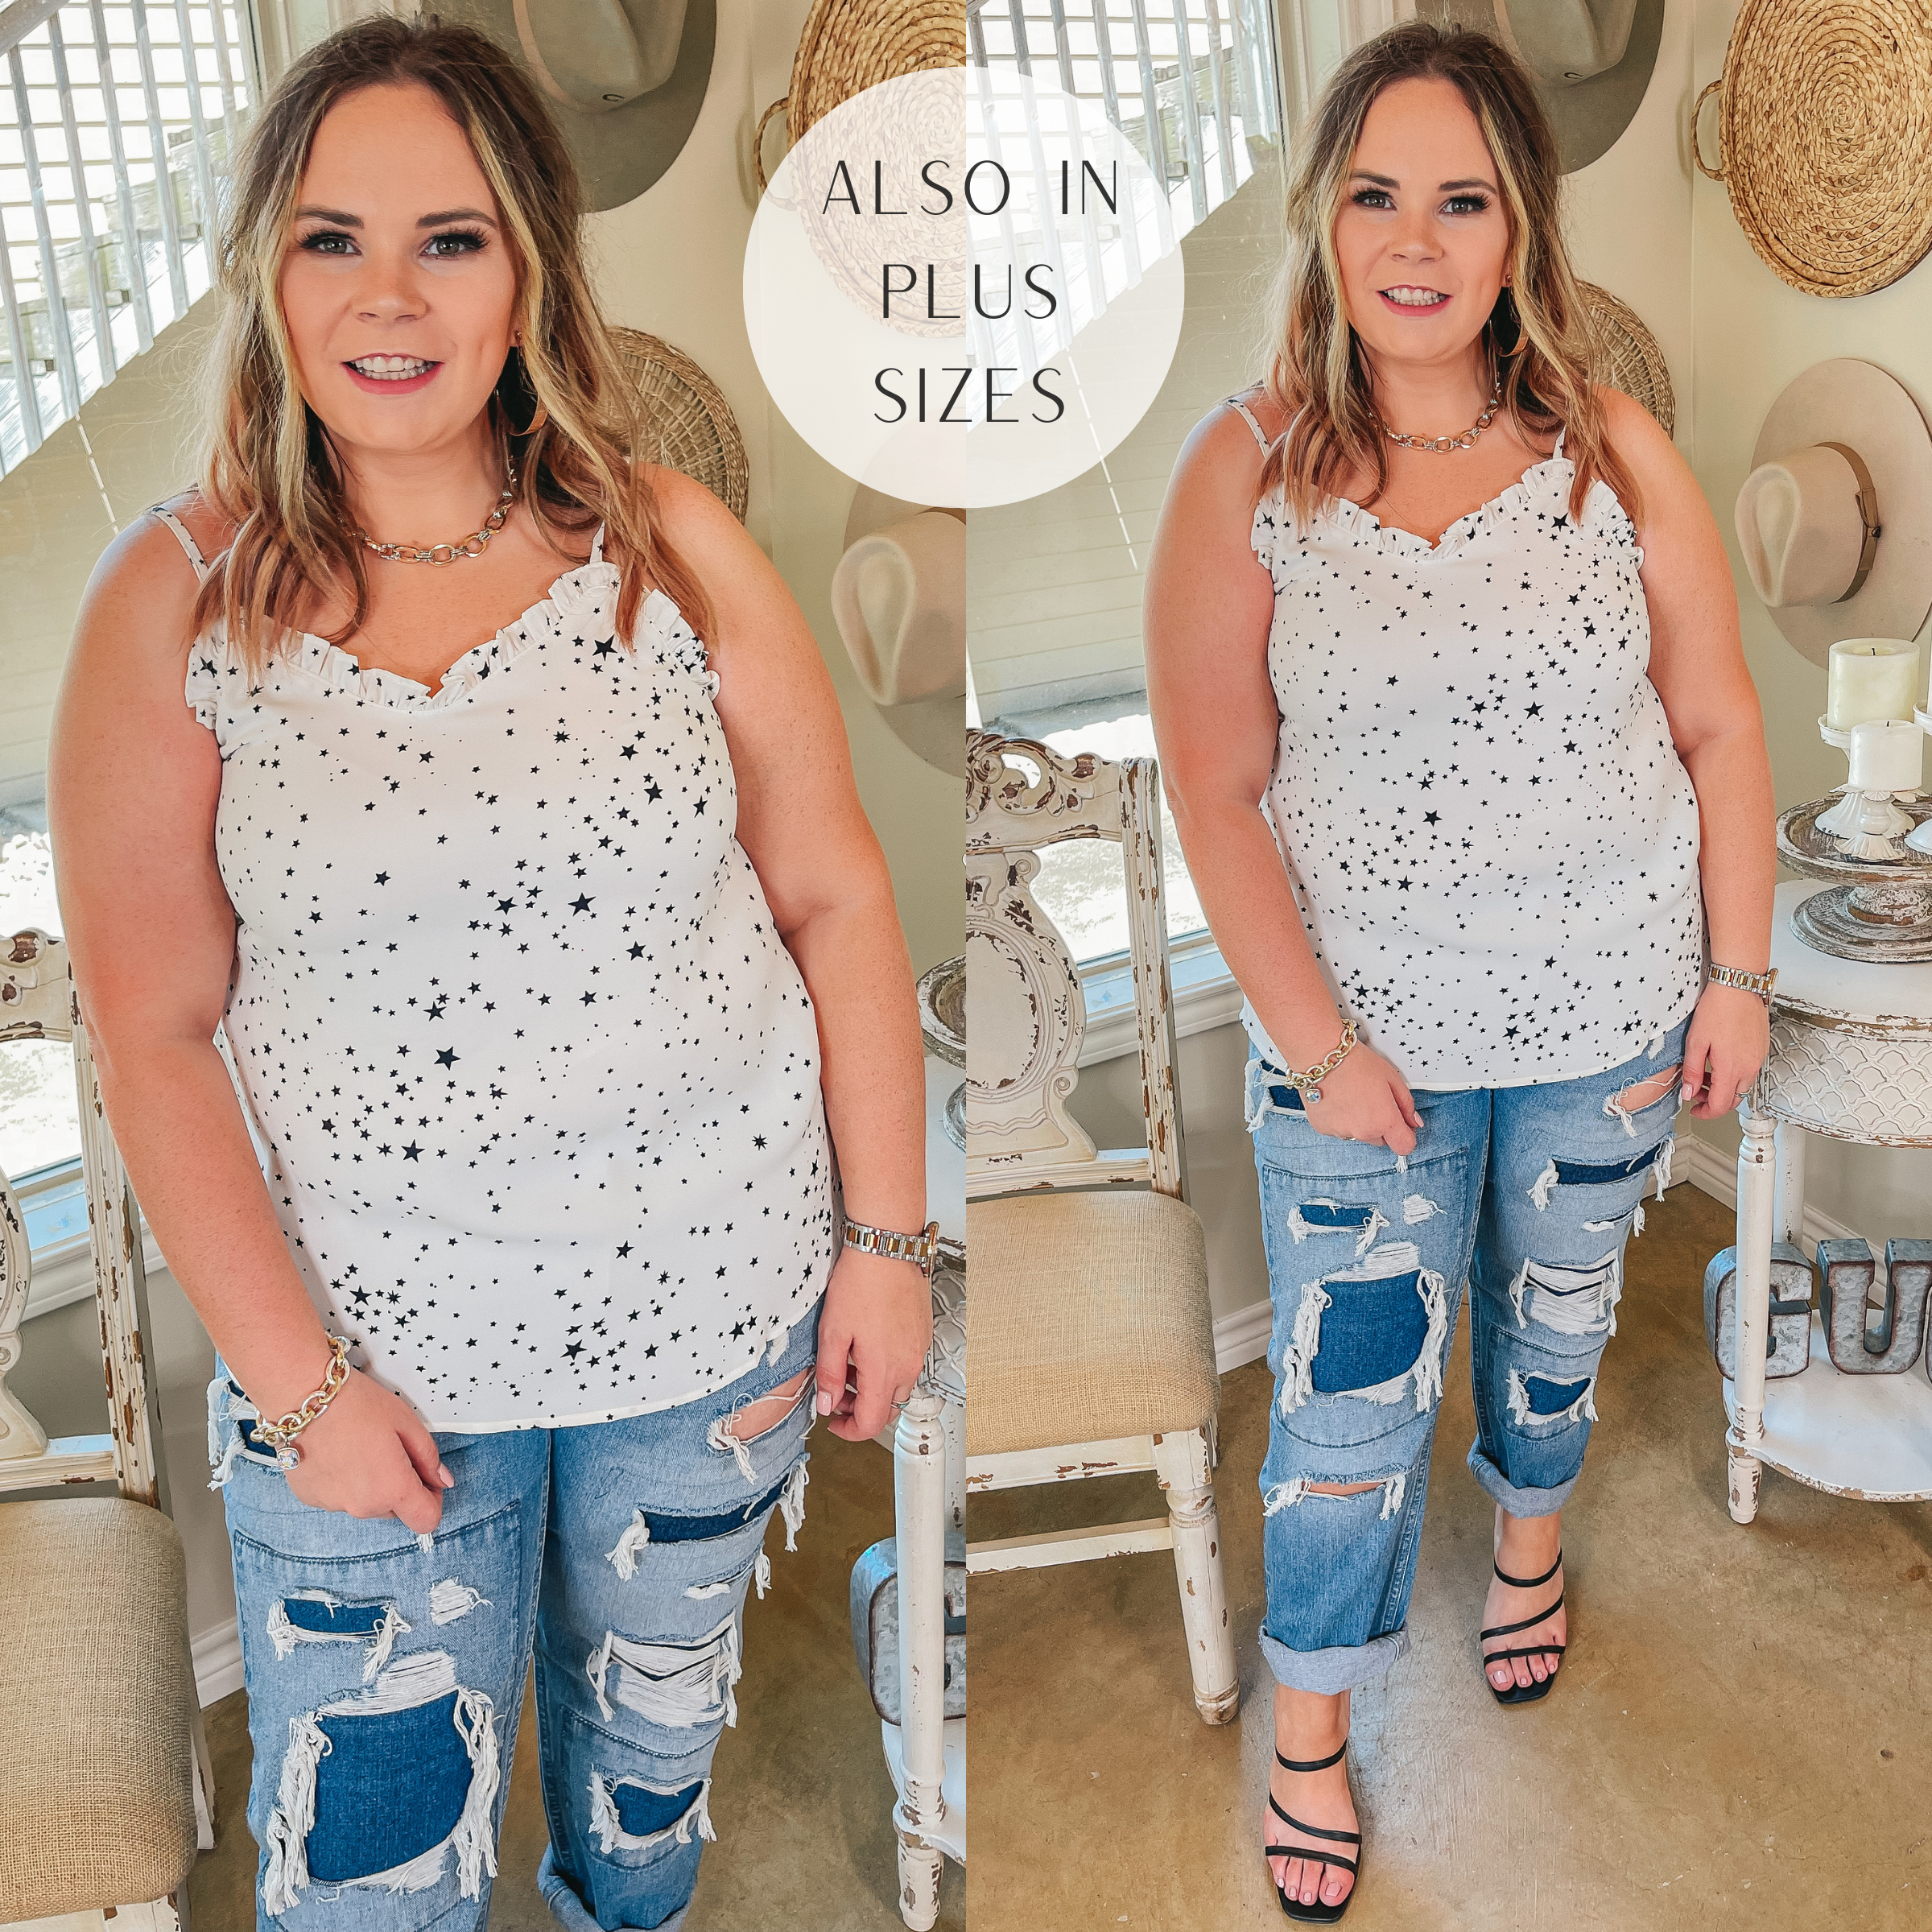 Last Chance Size 1XL & 3XL | Star Catcher Star Print Ruffle Trim Spaghetti Strap Top in Ivory - Giddy Up Glamour Boutique